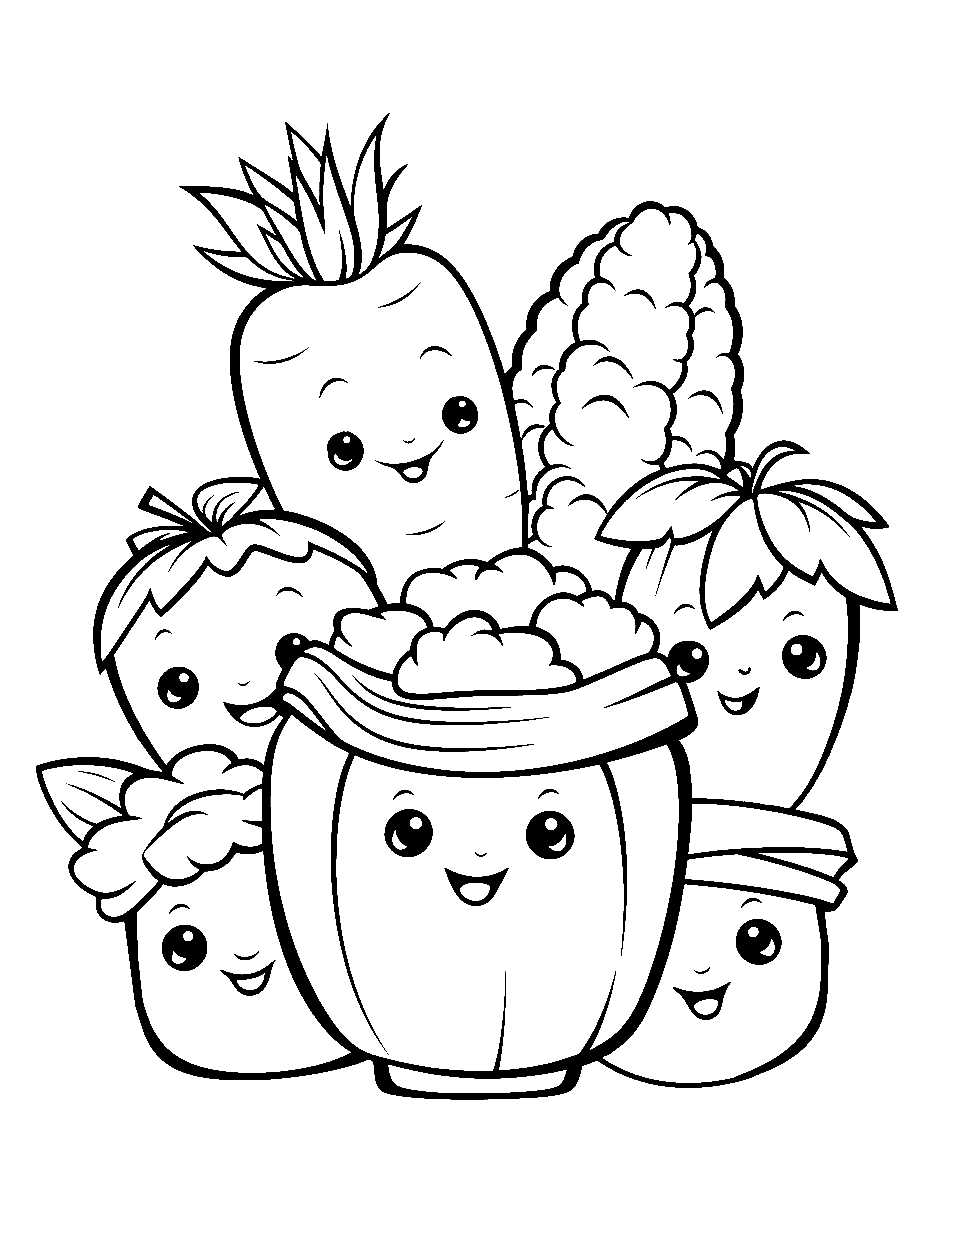 Farm Fresh Veggies Coloring Page - Vegetable Shopkins with joyful expressions.